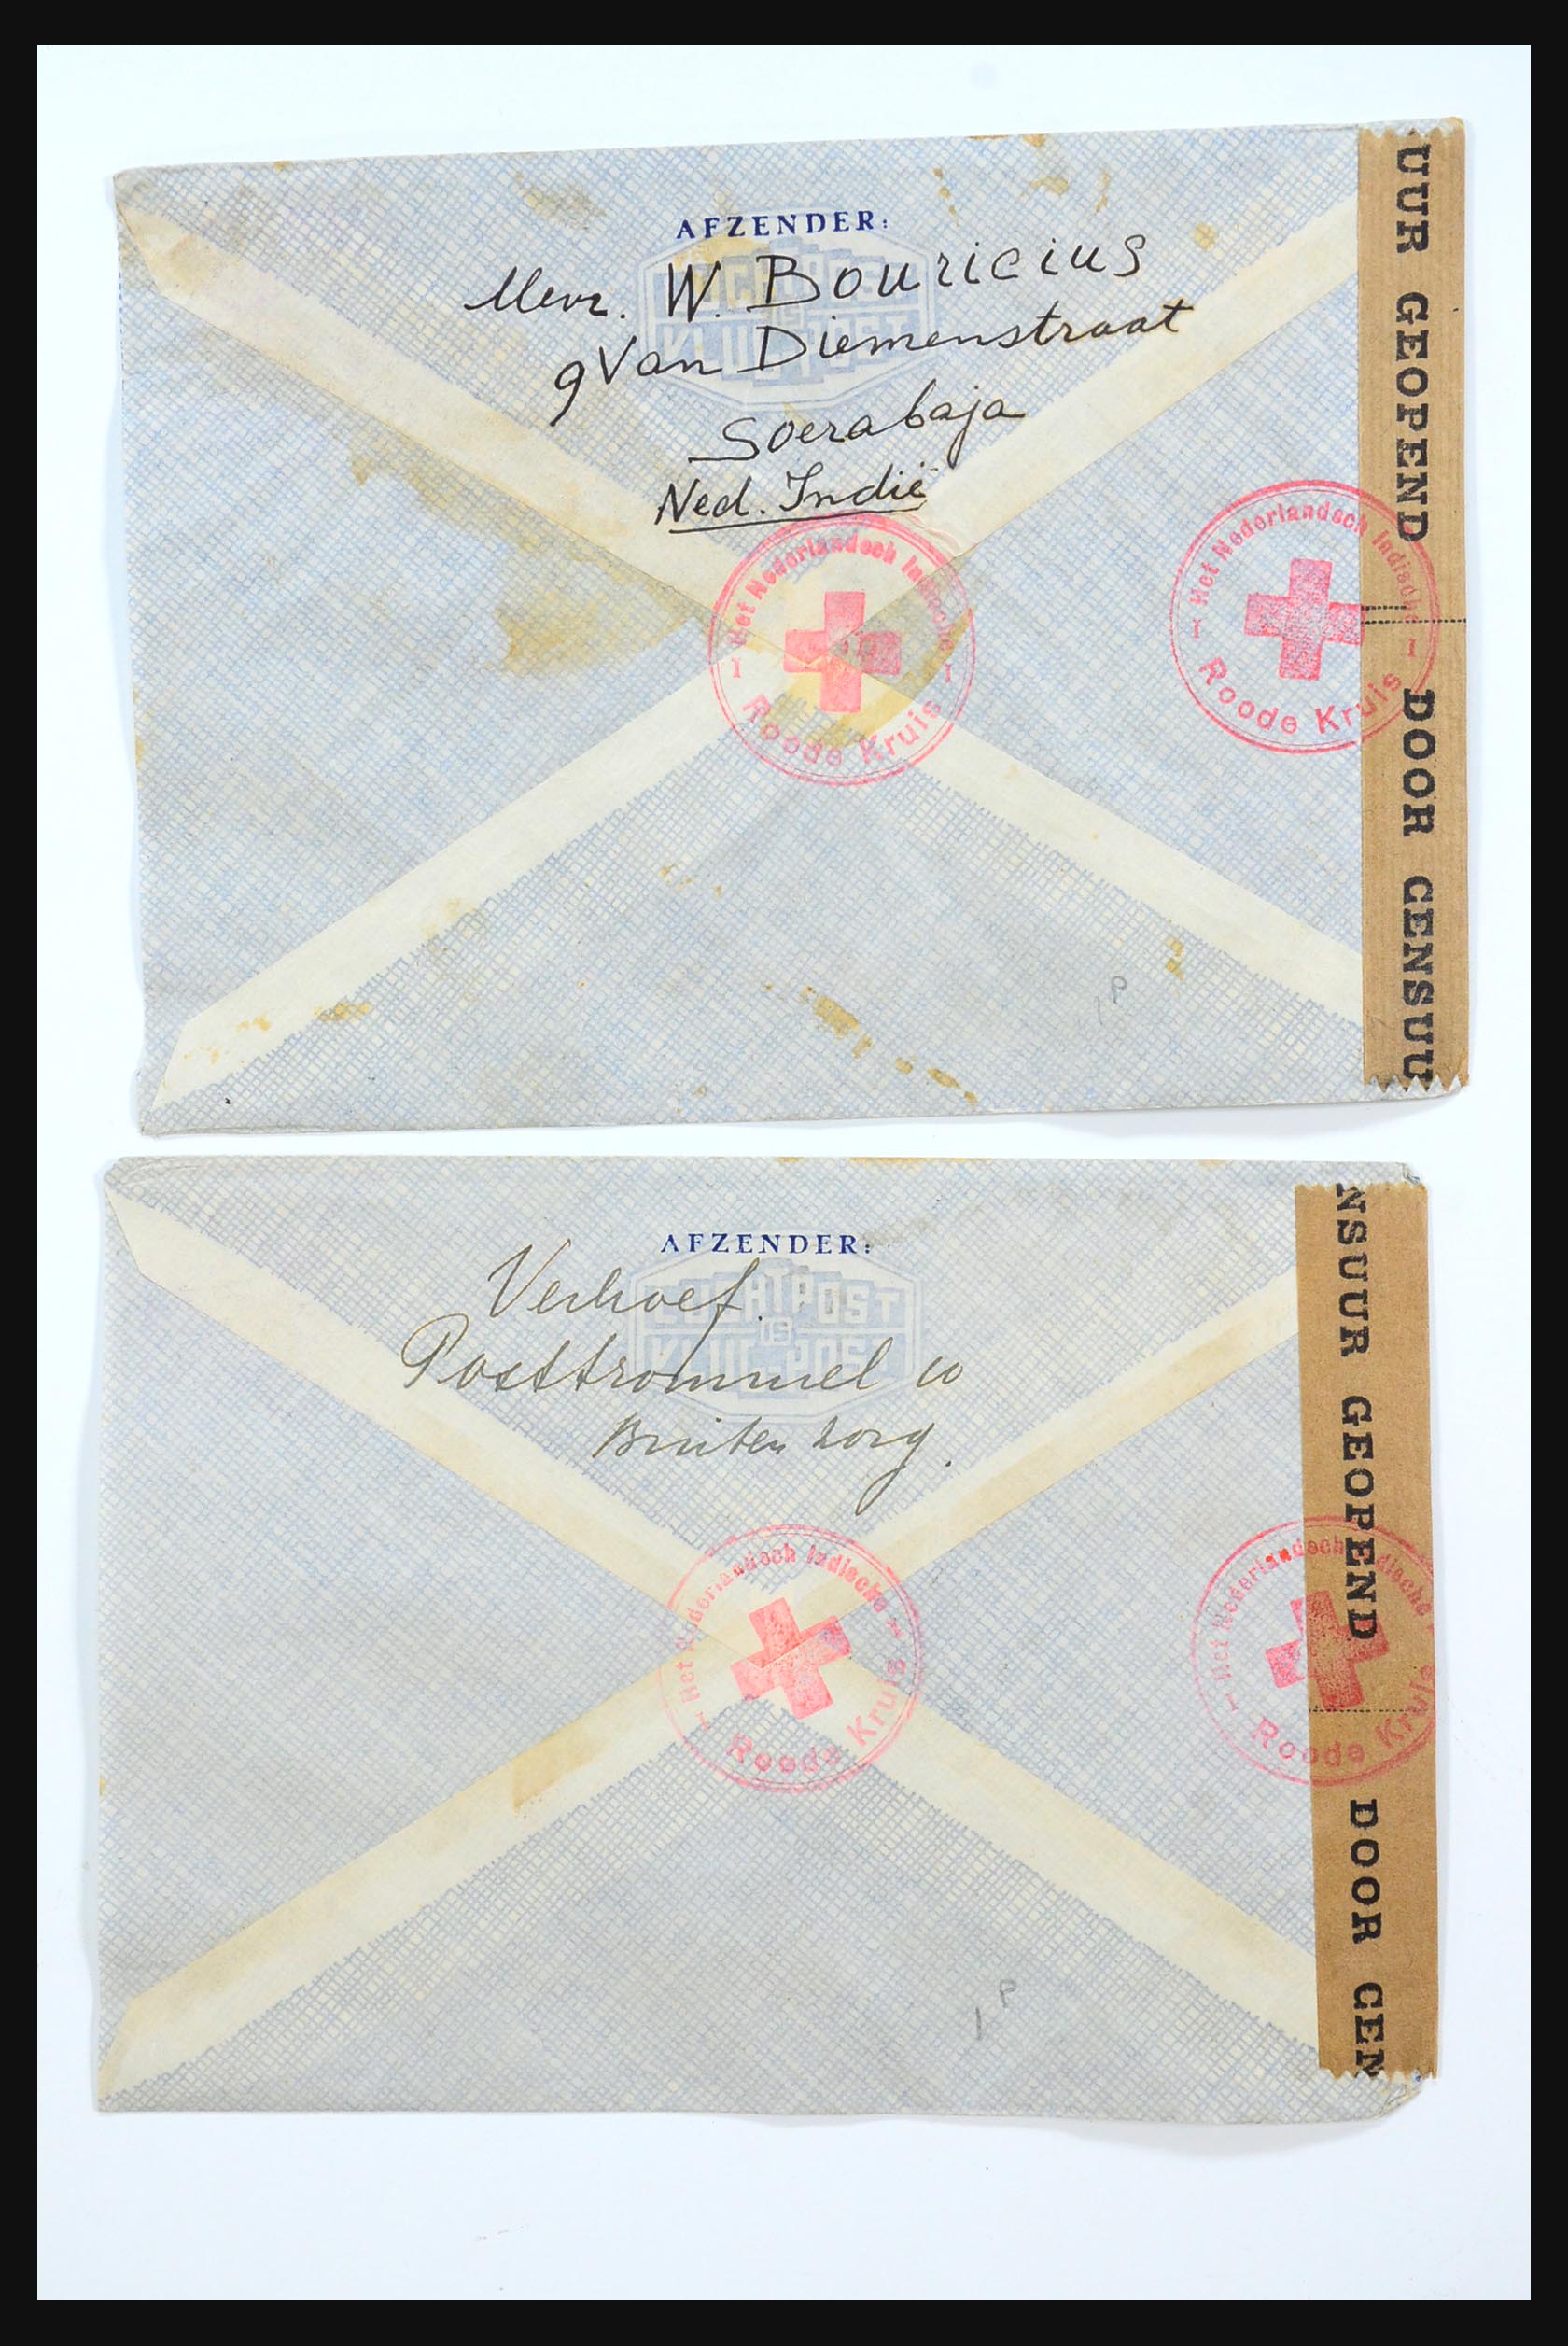 31362 084 - 31362 Netherlands Indies Japanese occupation covers 1942-1945.